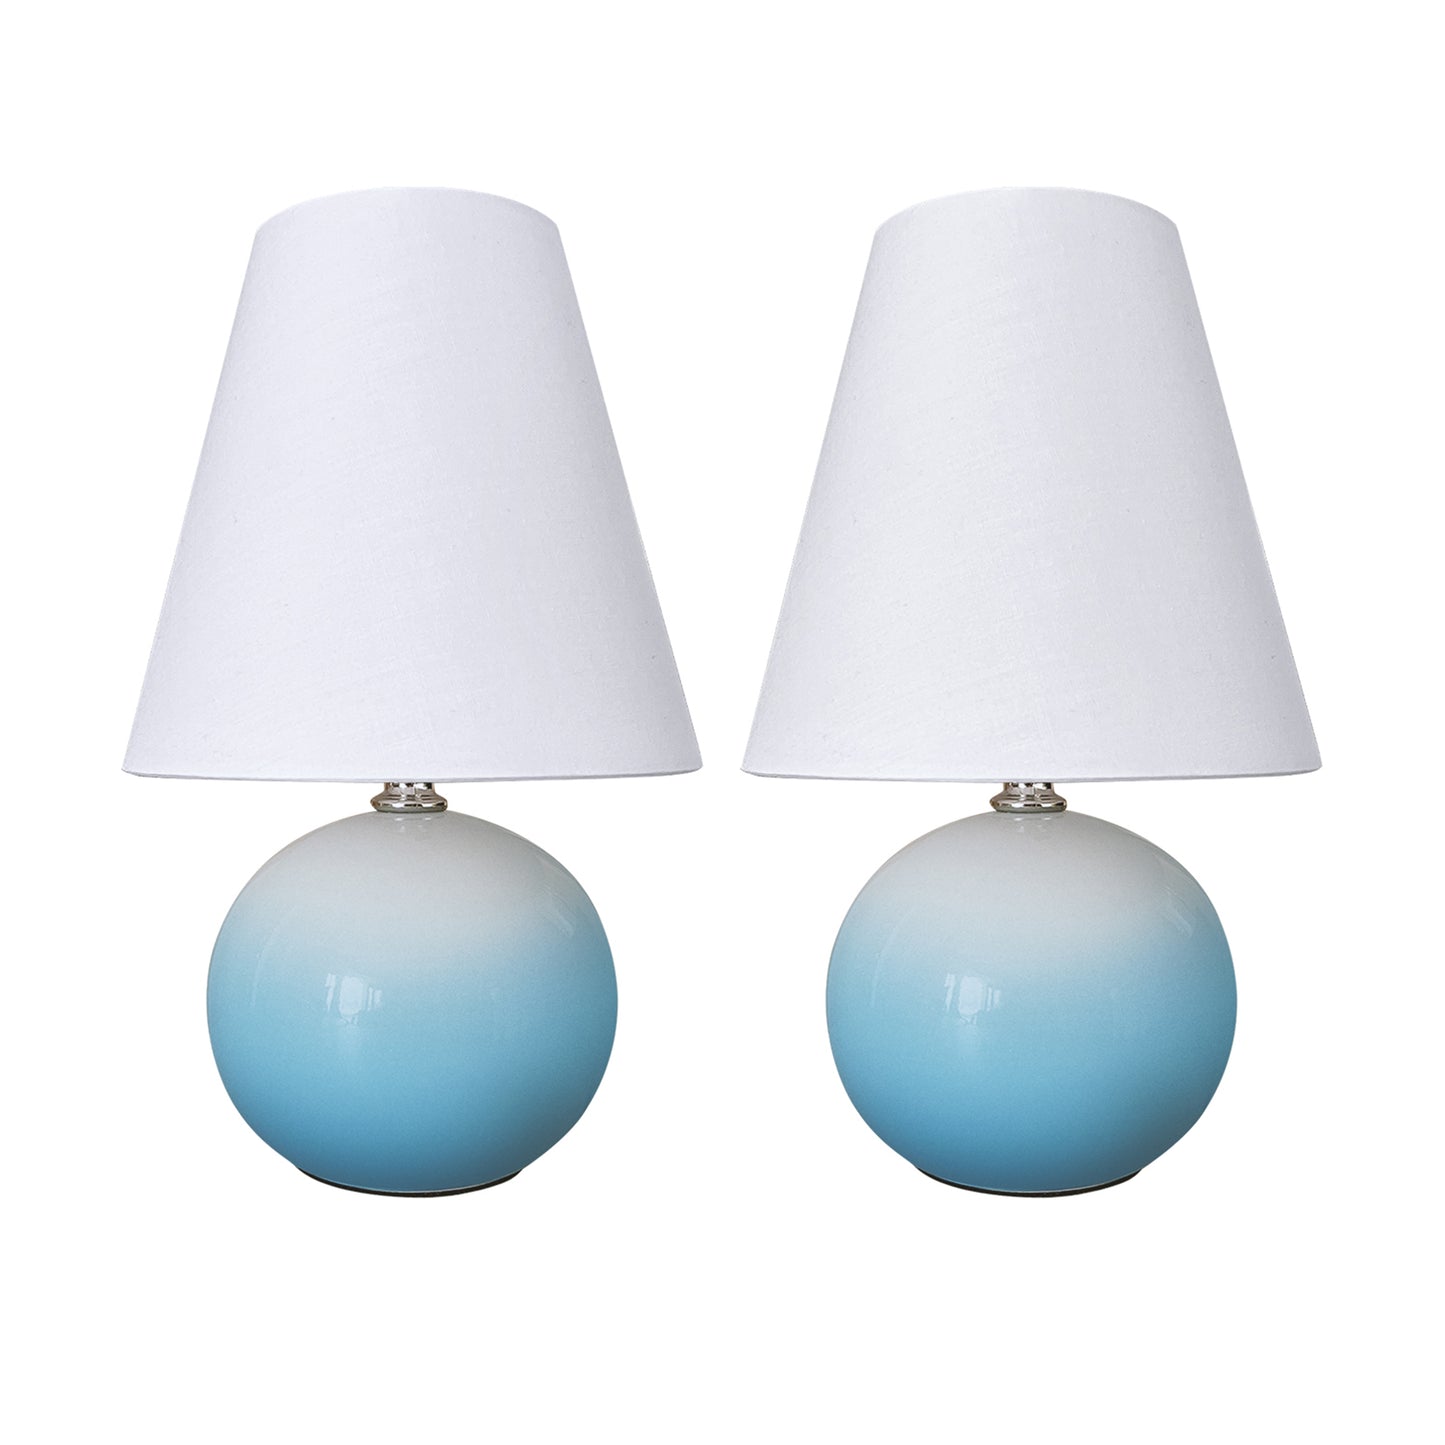 11-inch Gradient Ceramic Table Lamps Set of 2 Bulbs Included